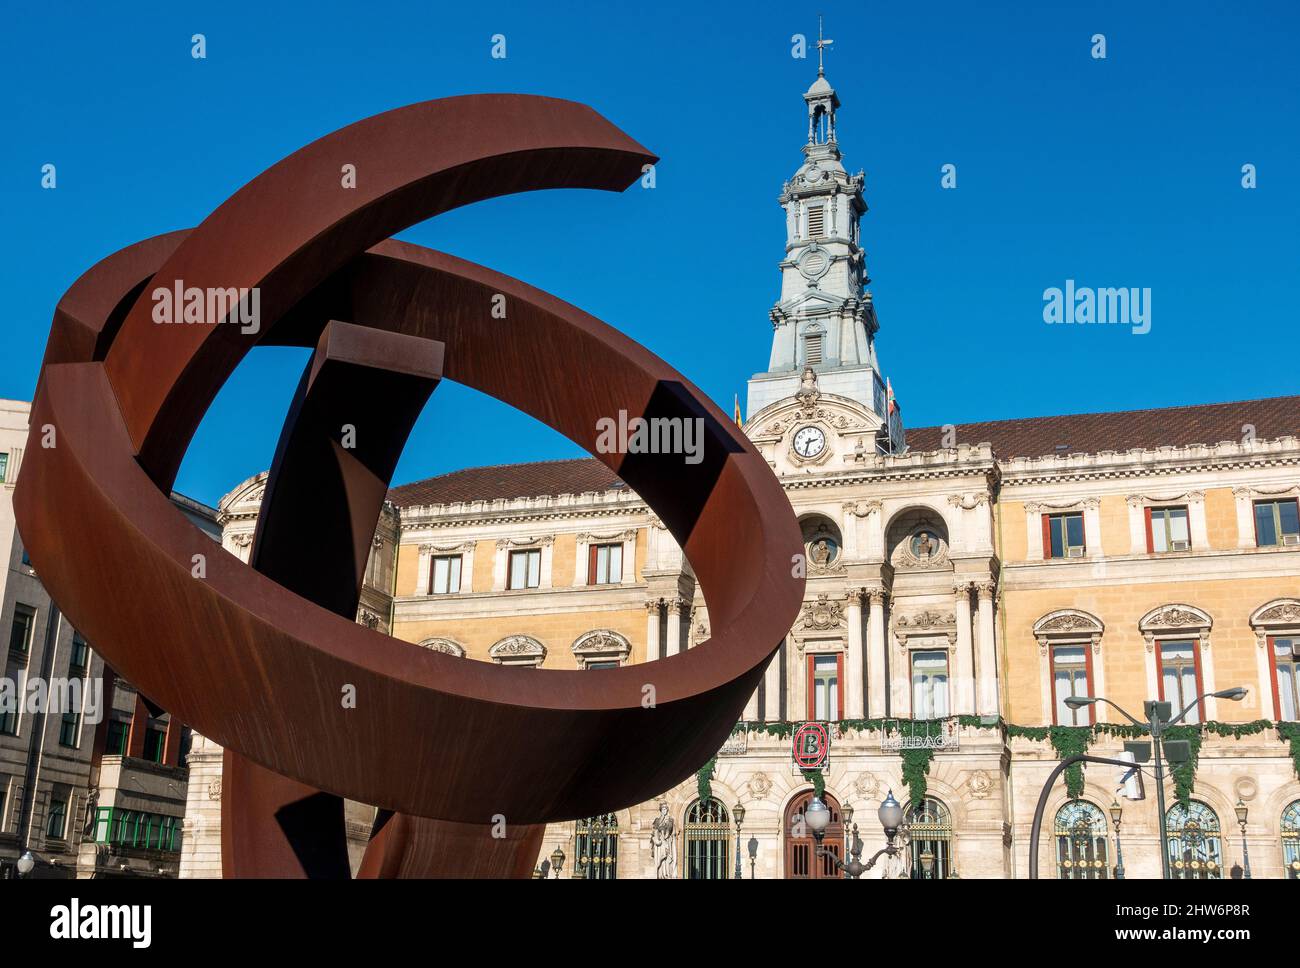 Sculpture by Jorge Oteiza in front of the city hall in Bilbao, Basque Country, Spain Stock Photo